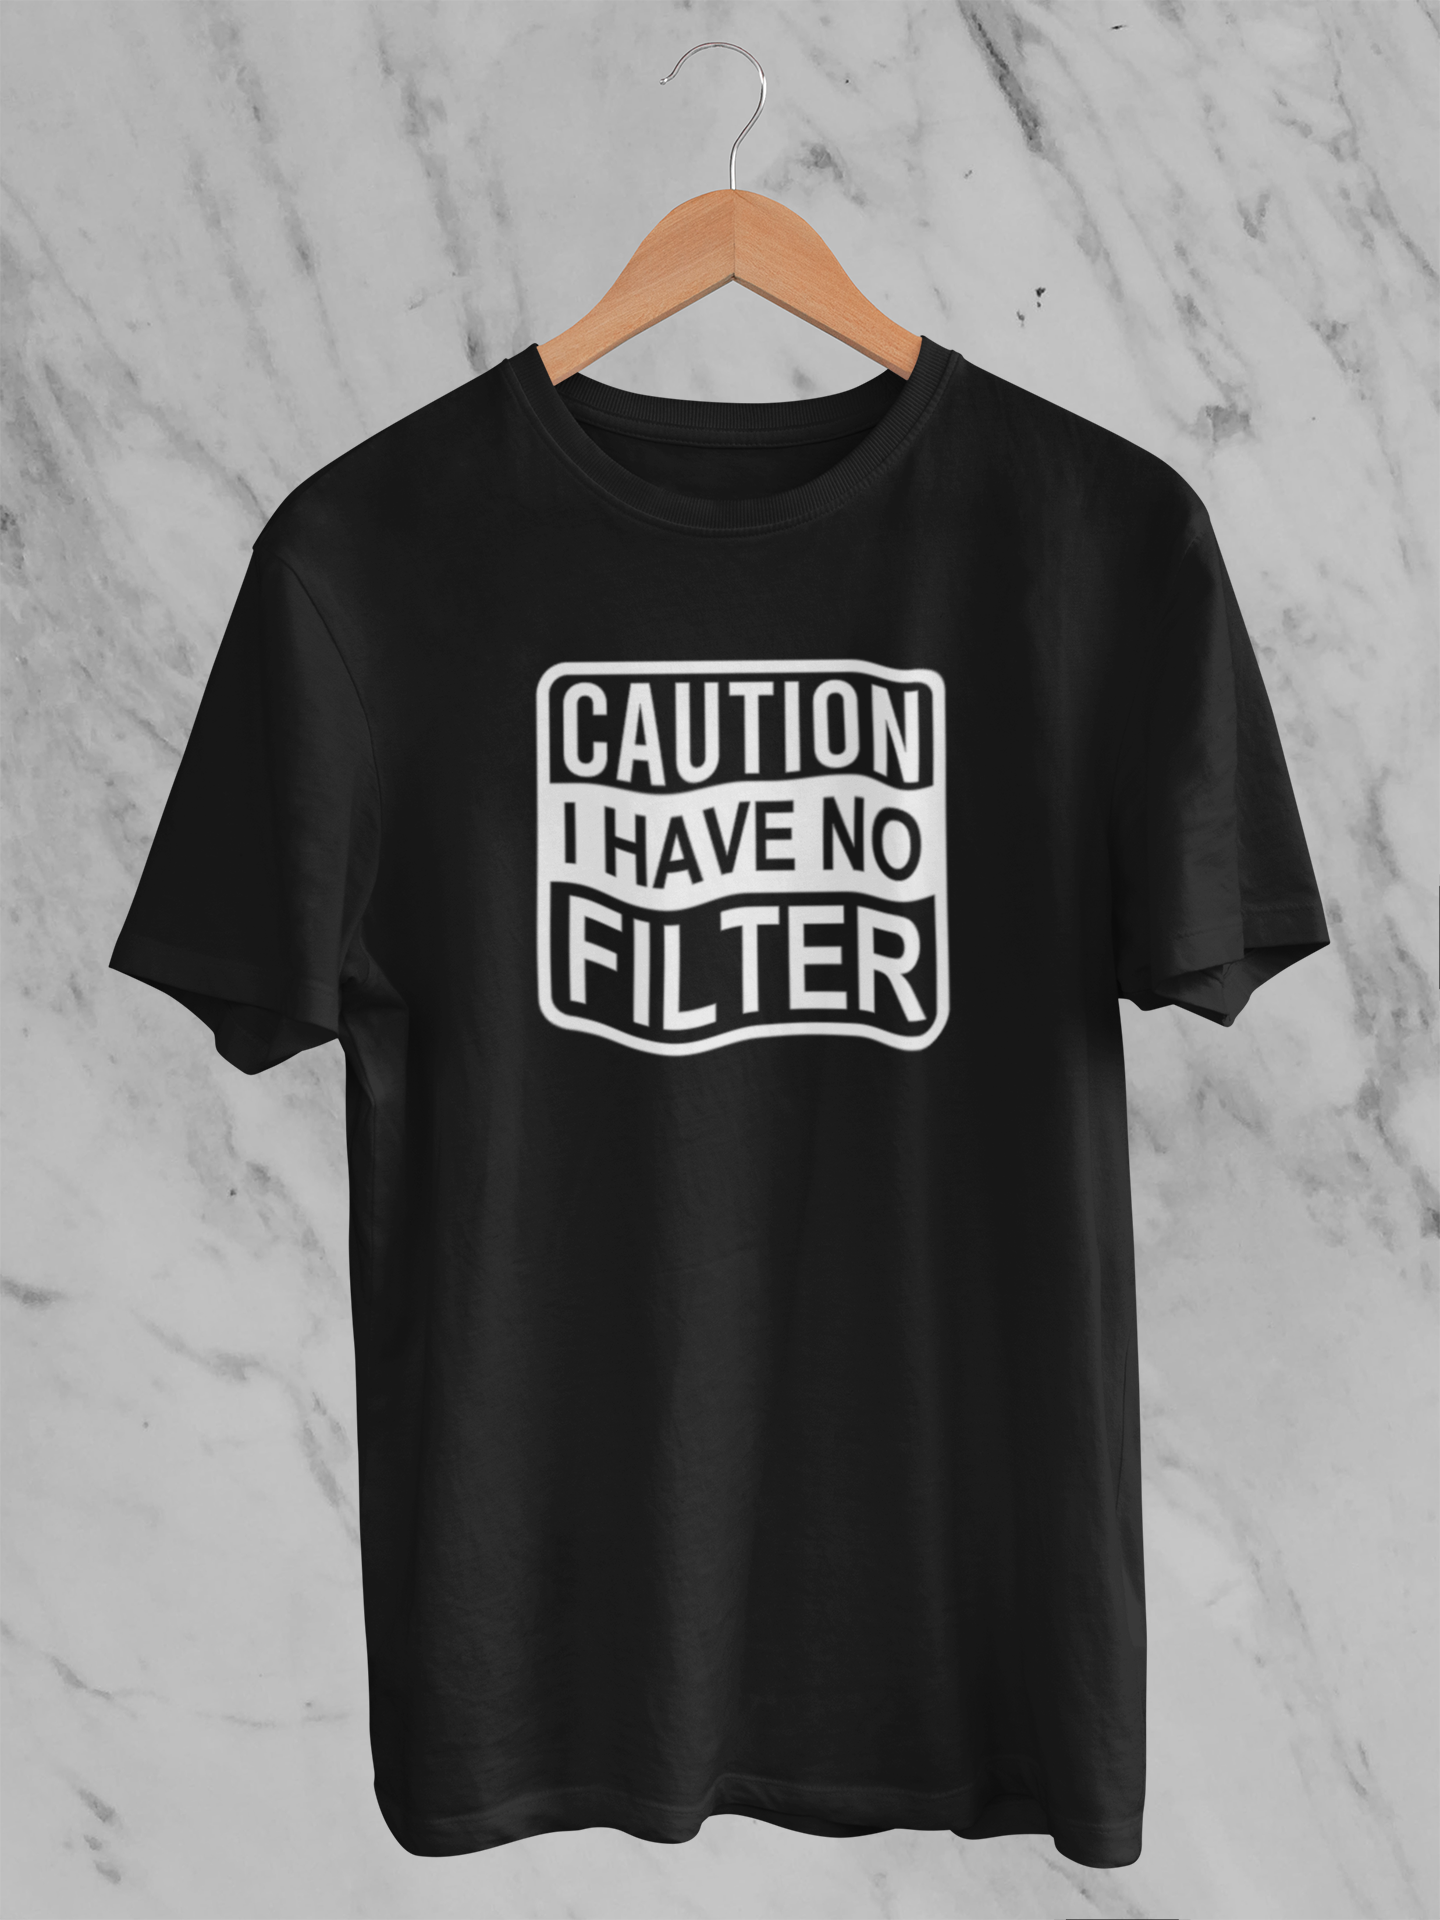 Caution I have no filter Tee